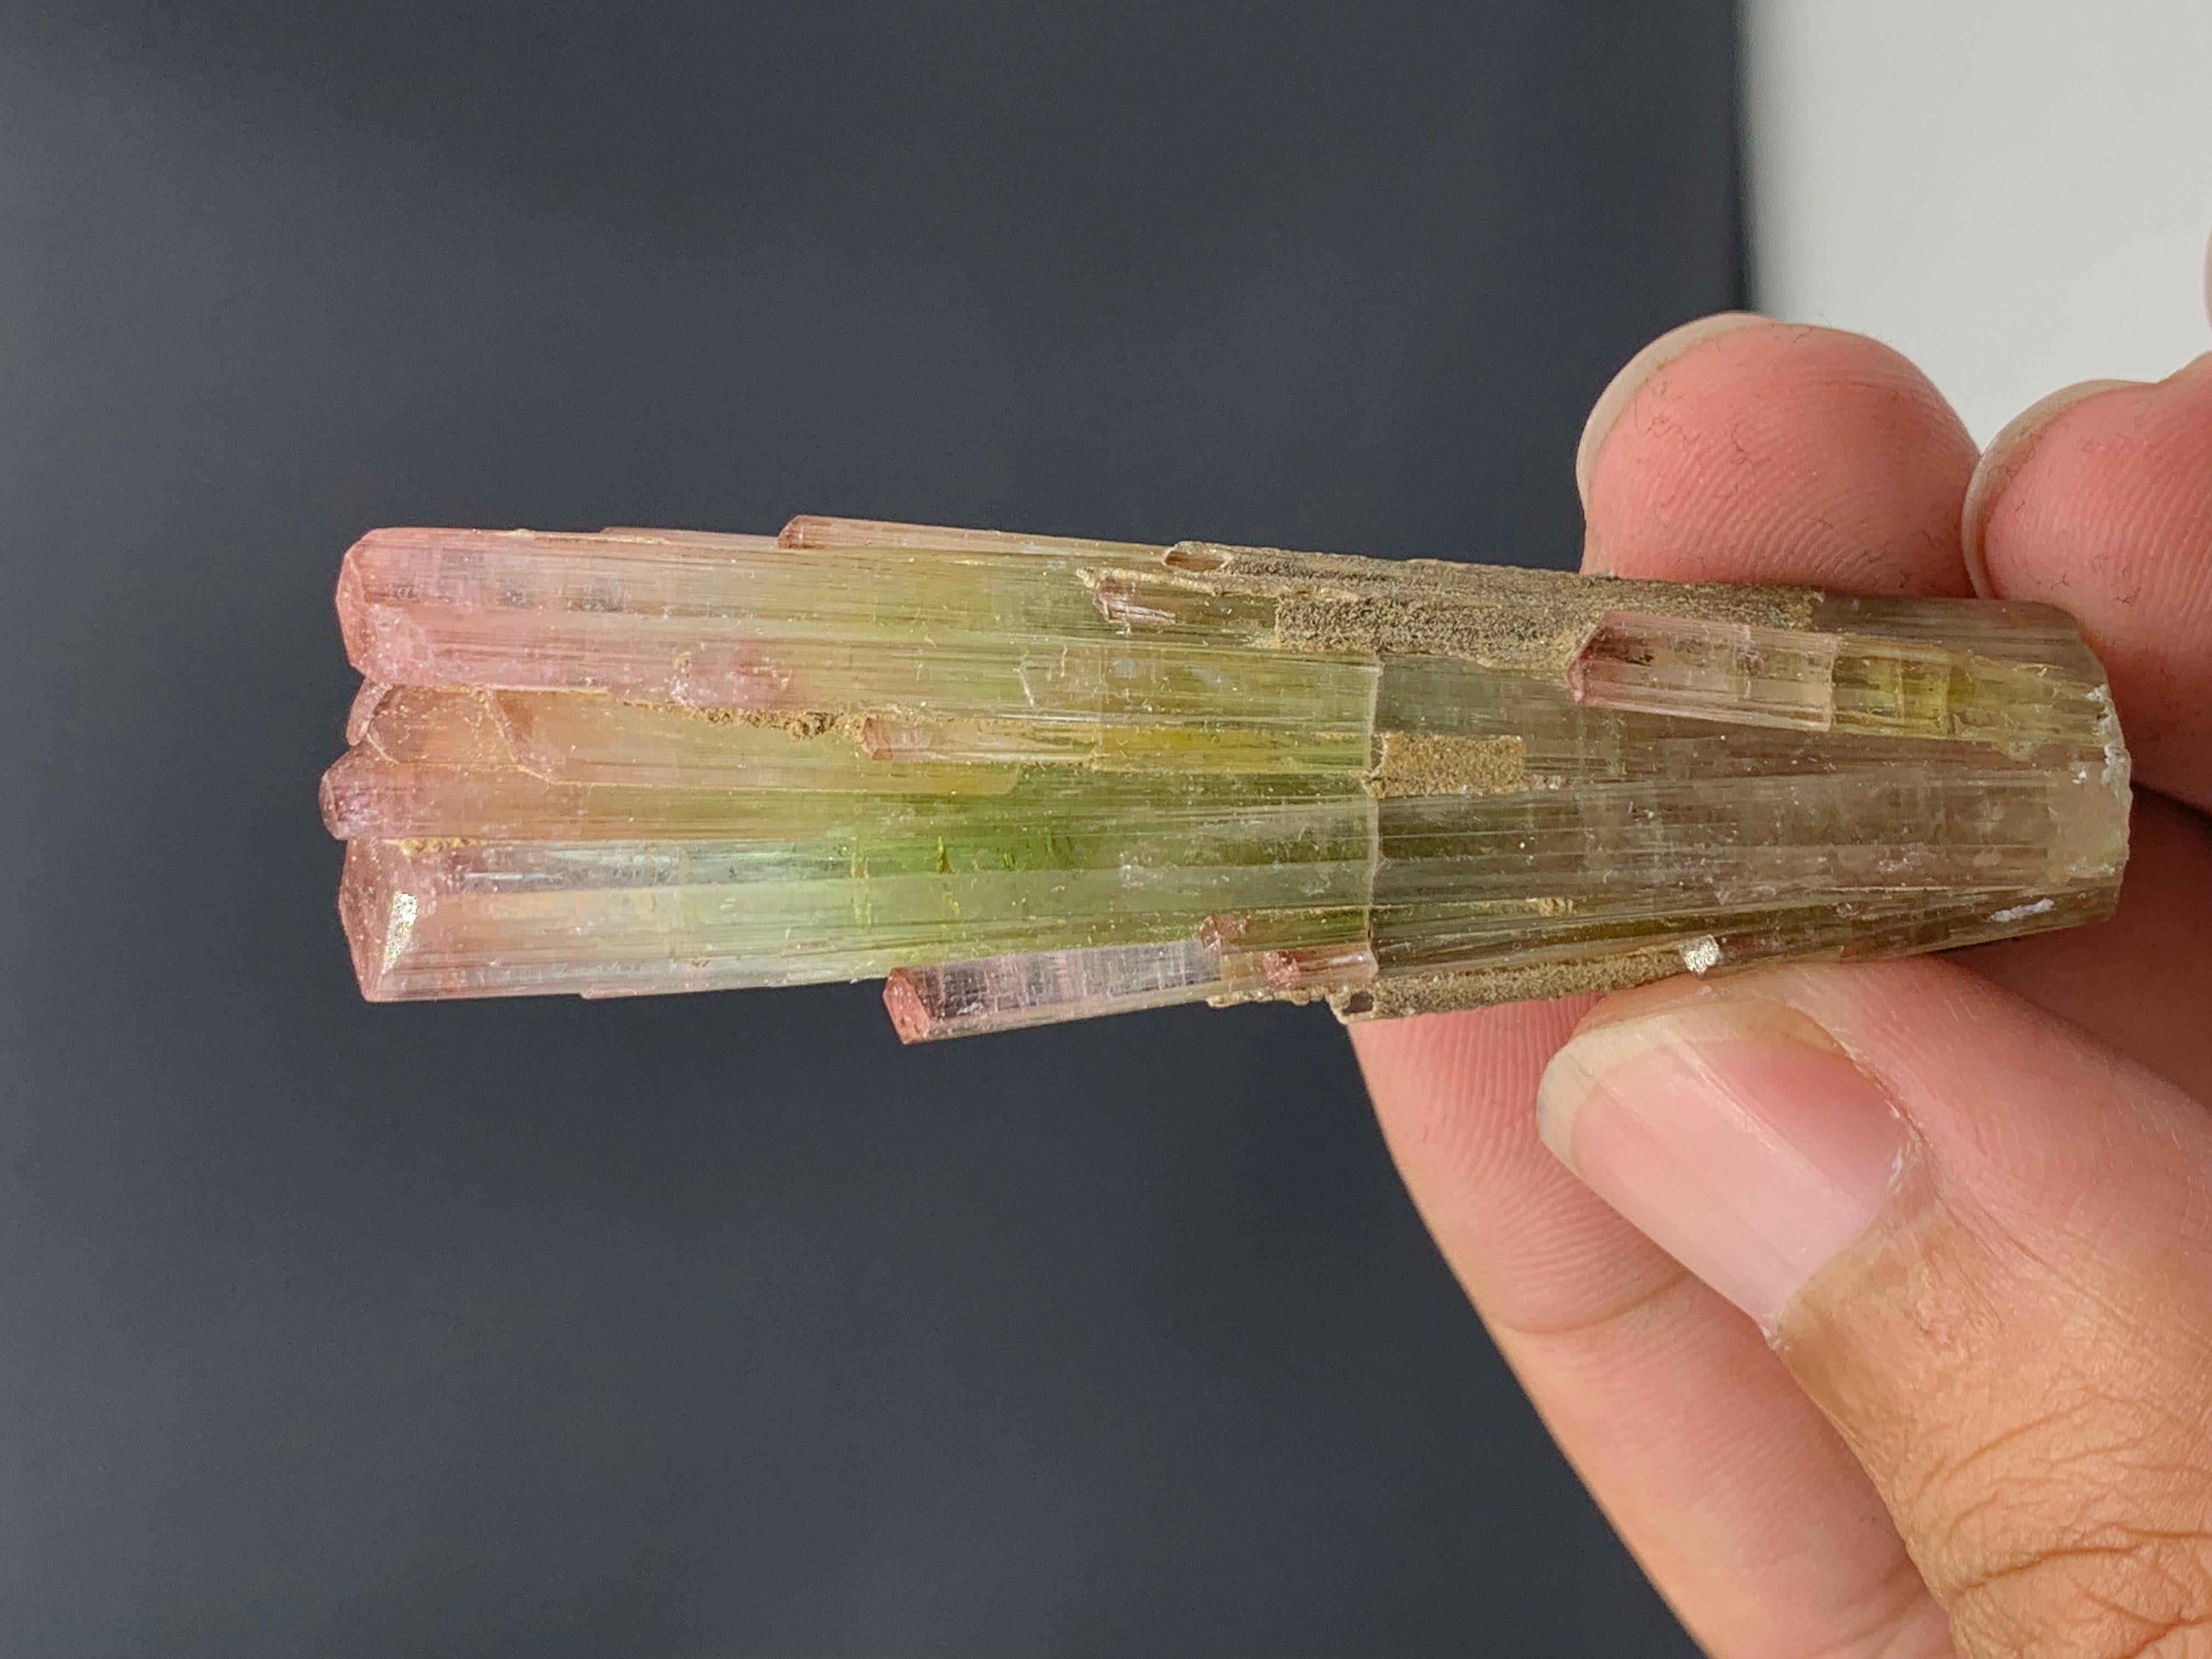 133 Carat Tri Color Tourmaline Crystal From Paprook mine, Afghanistan 
Weight: 133 Carat 
Dimension: 6.3 x 1.8 x 1.3 Cm 
Origin: Paprook Mine, Afghanistan 

Tourmaline is a crystalline silicate mineral group in which boron is compounded with